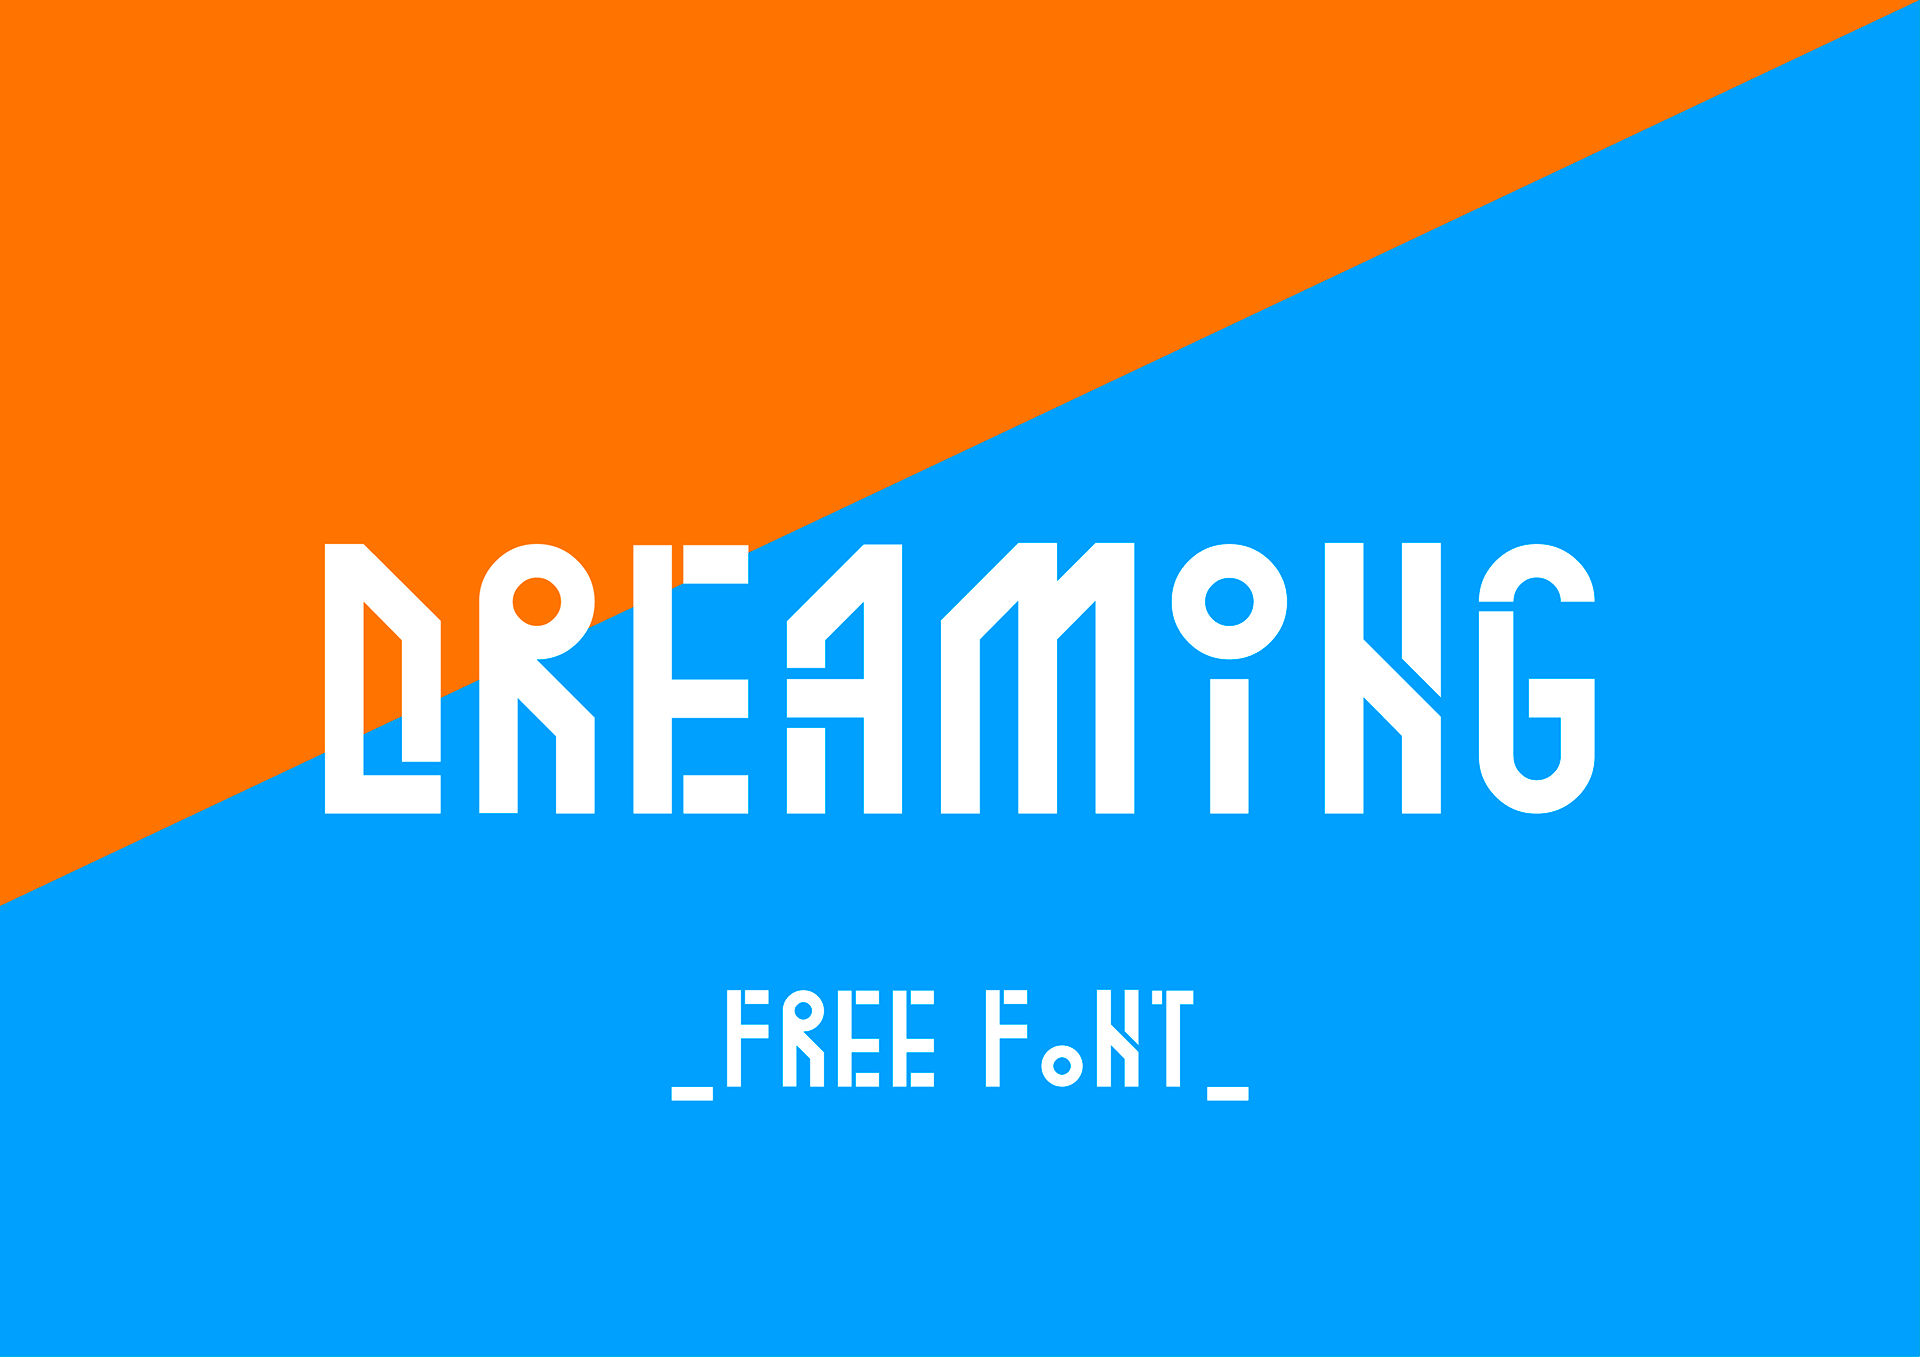 Example font Dreaming #1